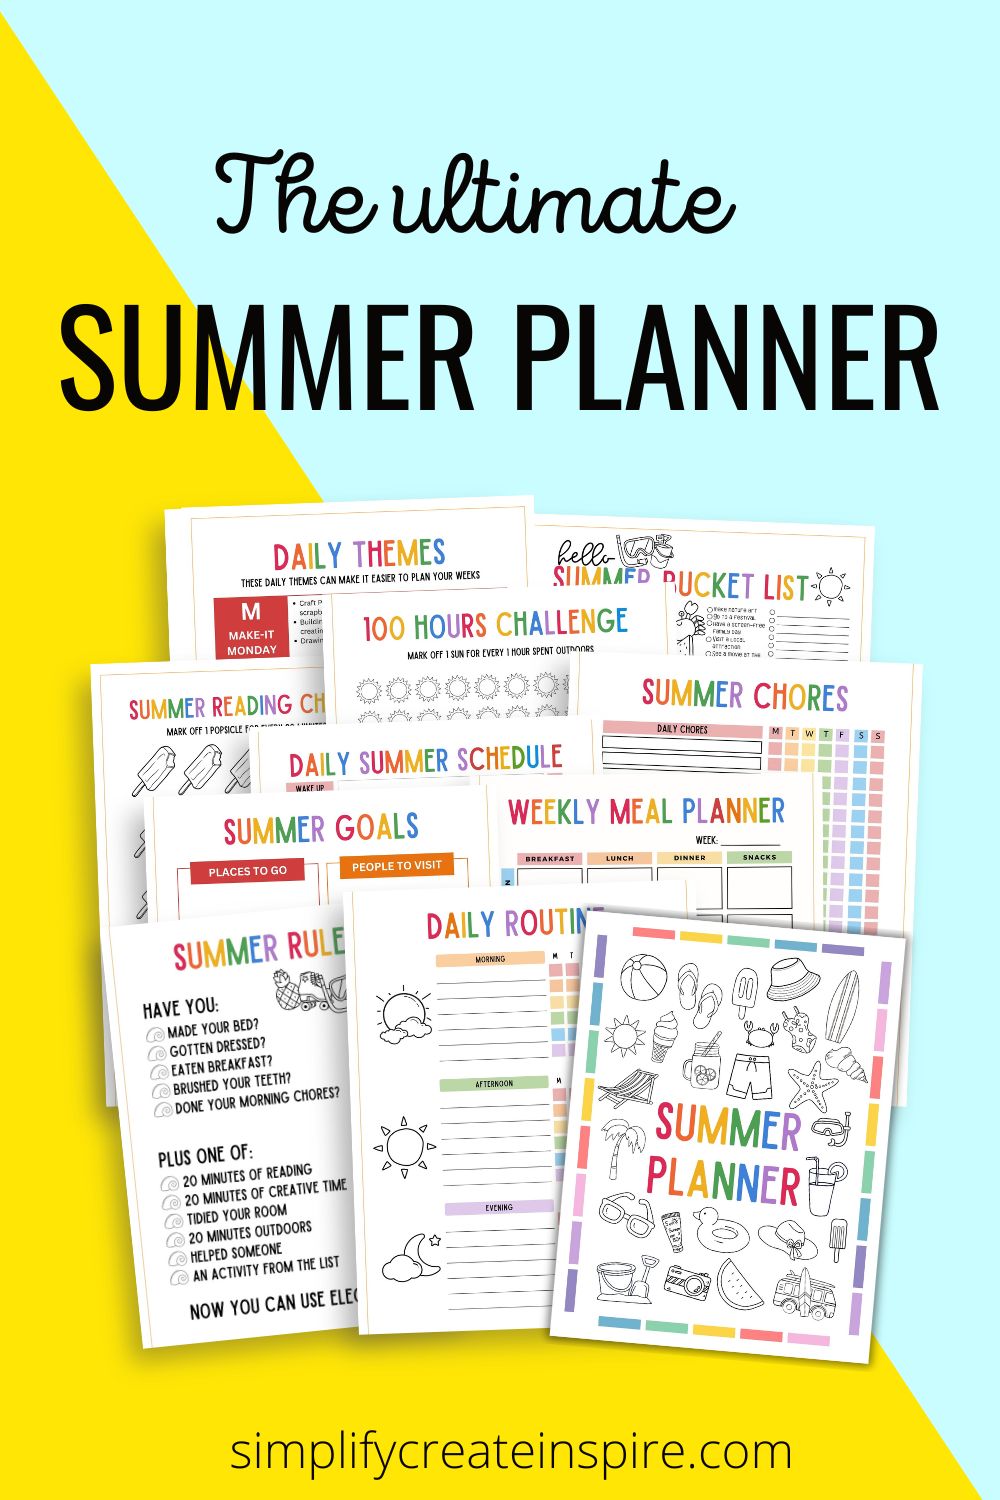 The ultimate summer planner printable.